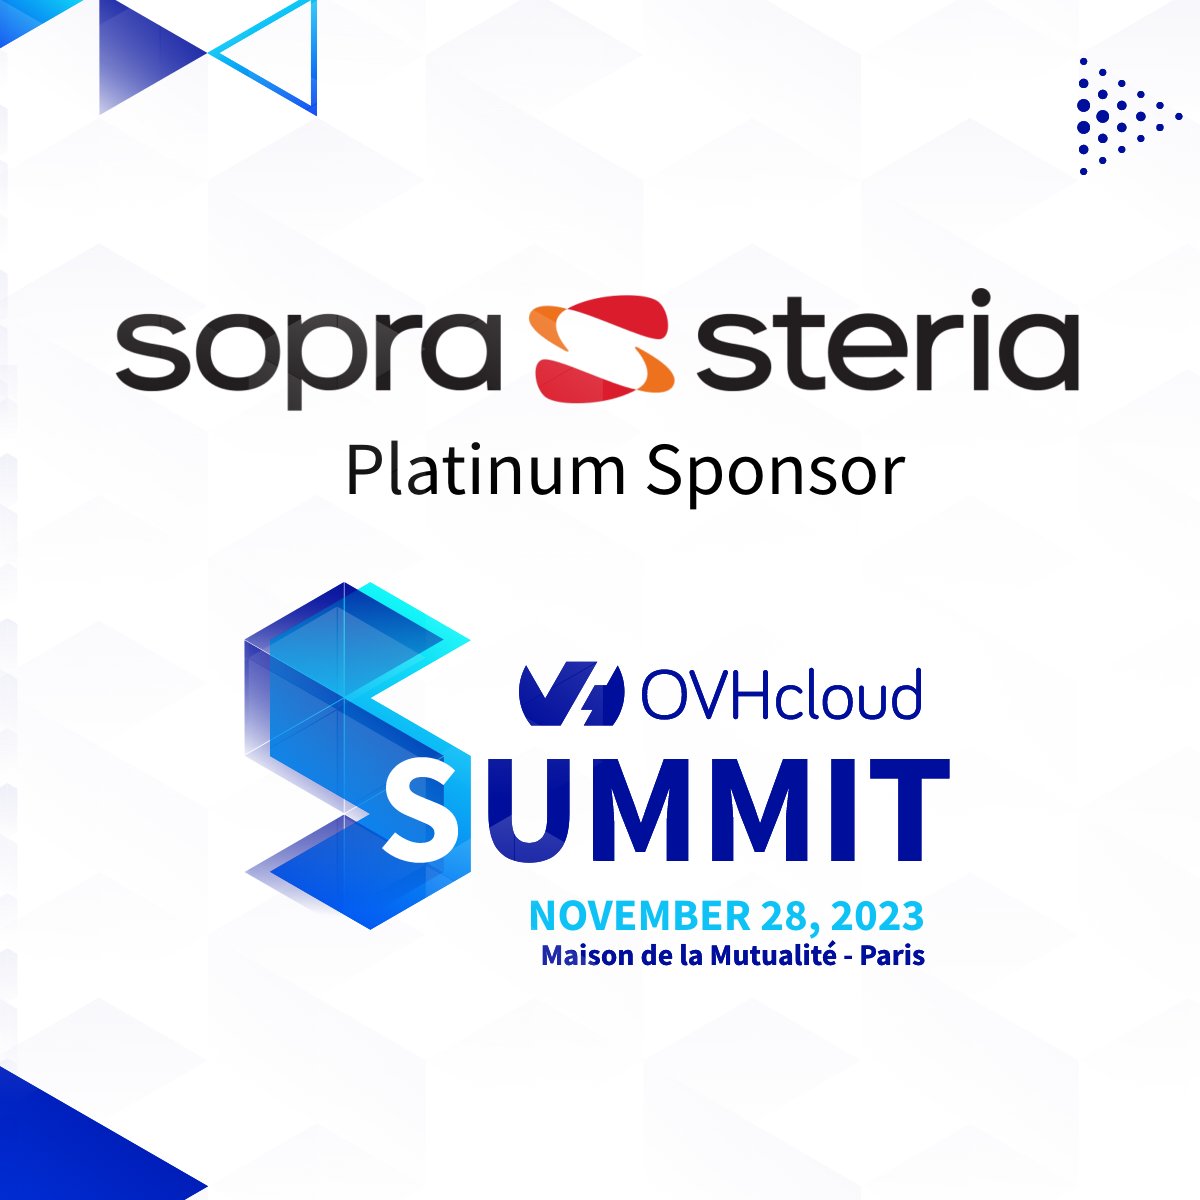 🌟We're thrilled to announce @SopraSteria as a Platinum Sponsor for #OVHcloudSummit on Nov 28! ☁️With their IT expertise, they are essential partners in shaping the future of the #cloud with us. 📍Register today for our #keynote: linkedin.com/events/ovhclou…